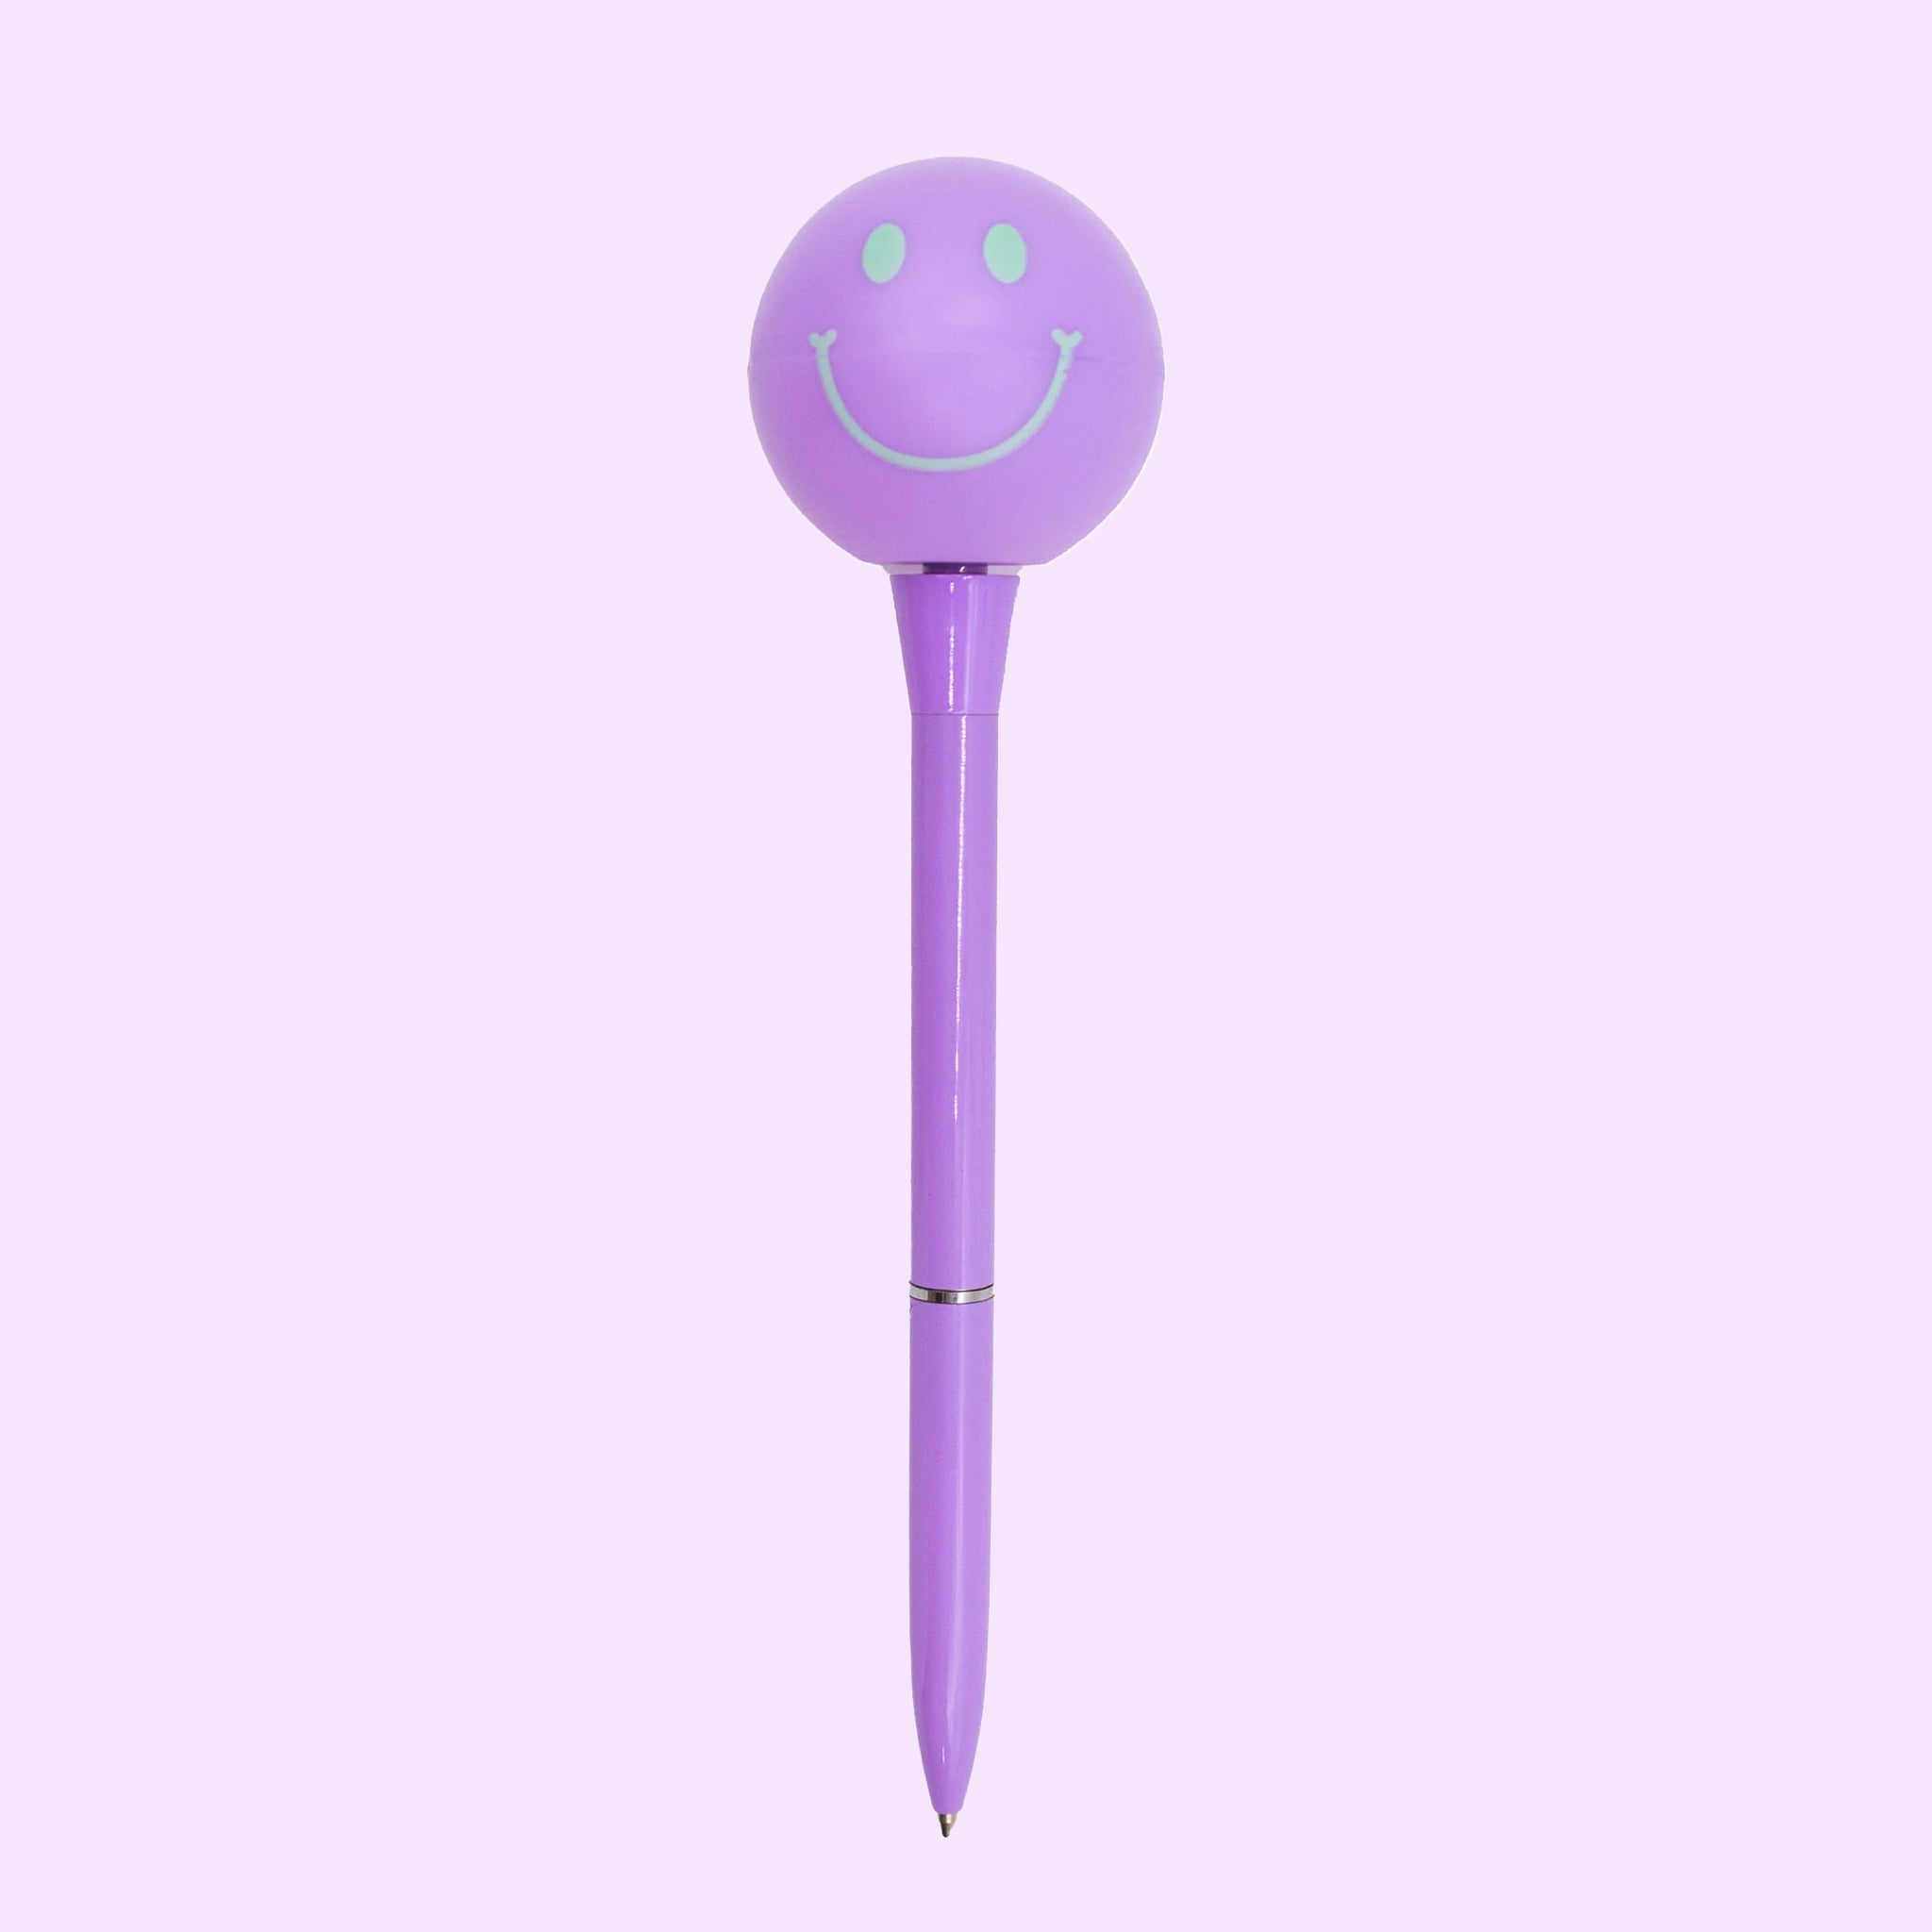 On a purple background is a purple pen with a circle spinning smiley face at the top. 